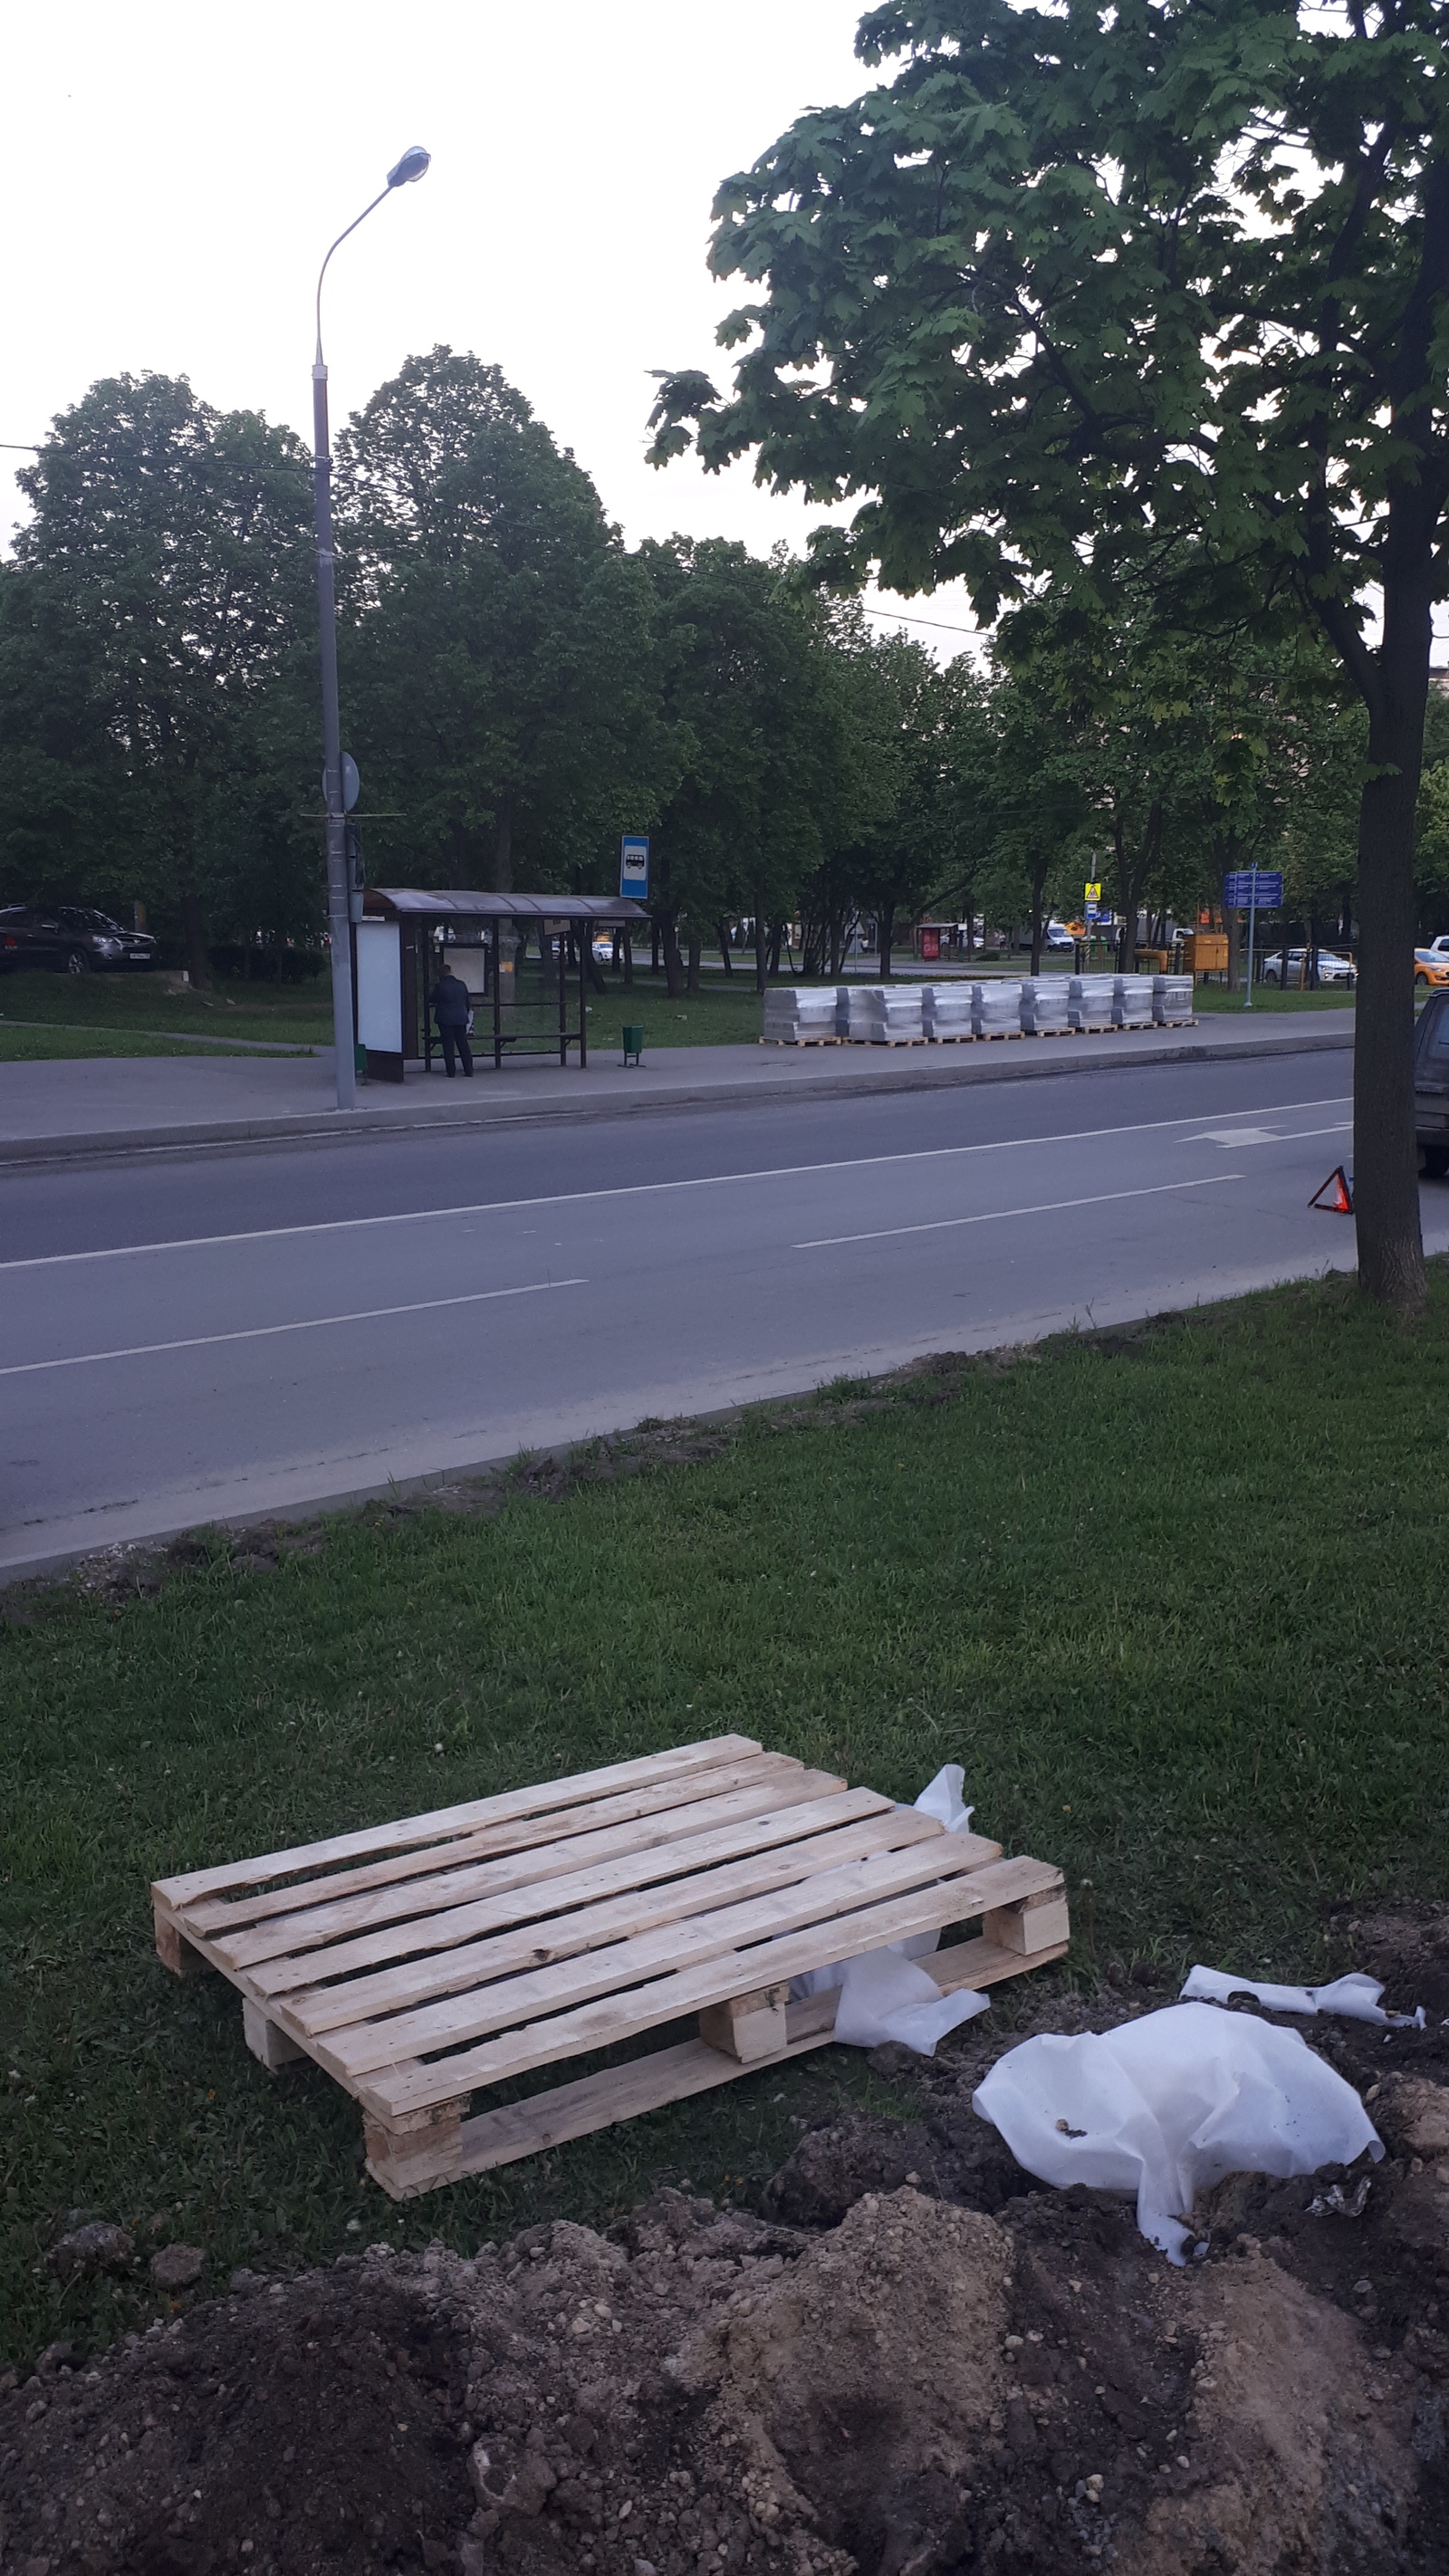 Know-how for replacing curbs in Biryulyovo - My, , Border, Longpost, Suddenly